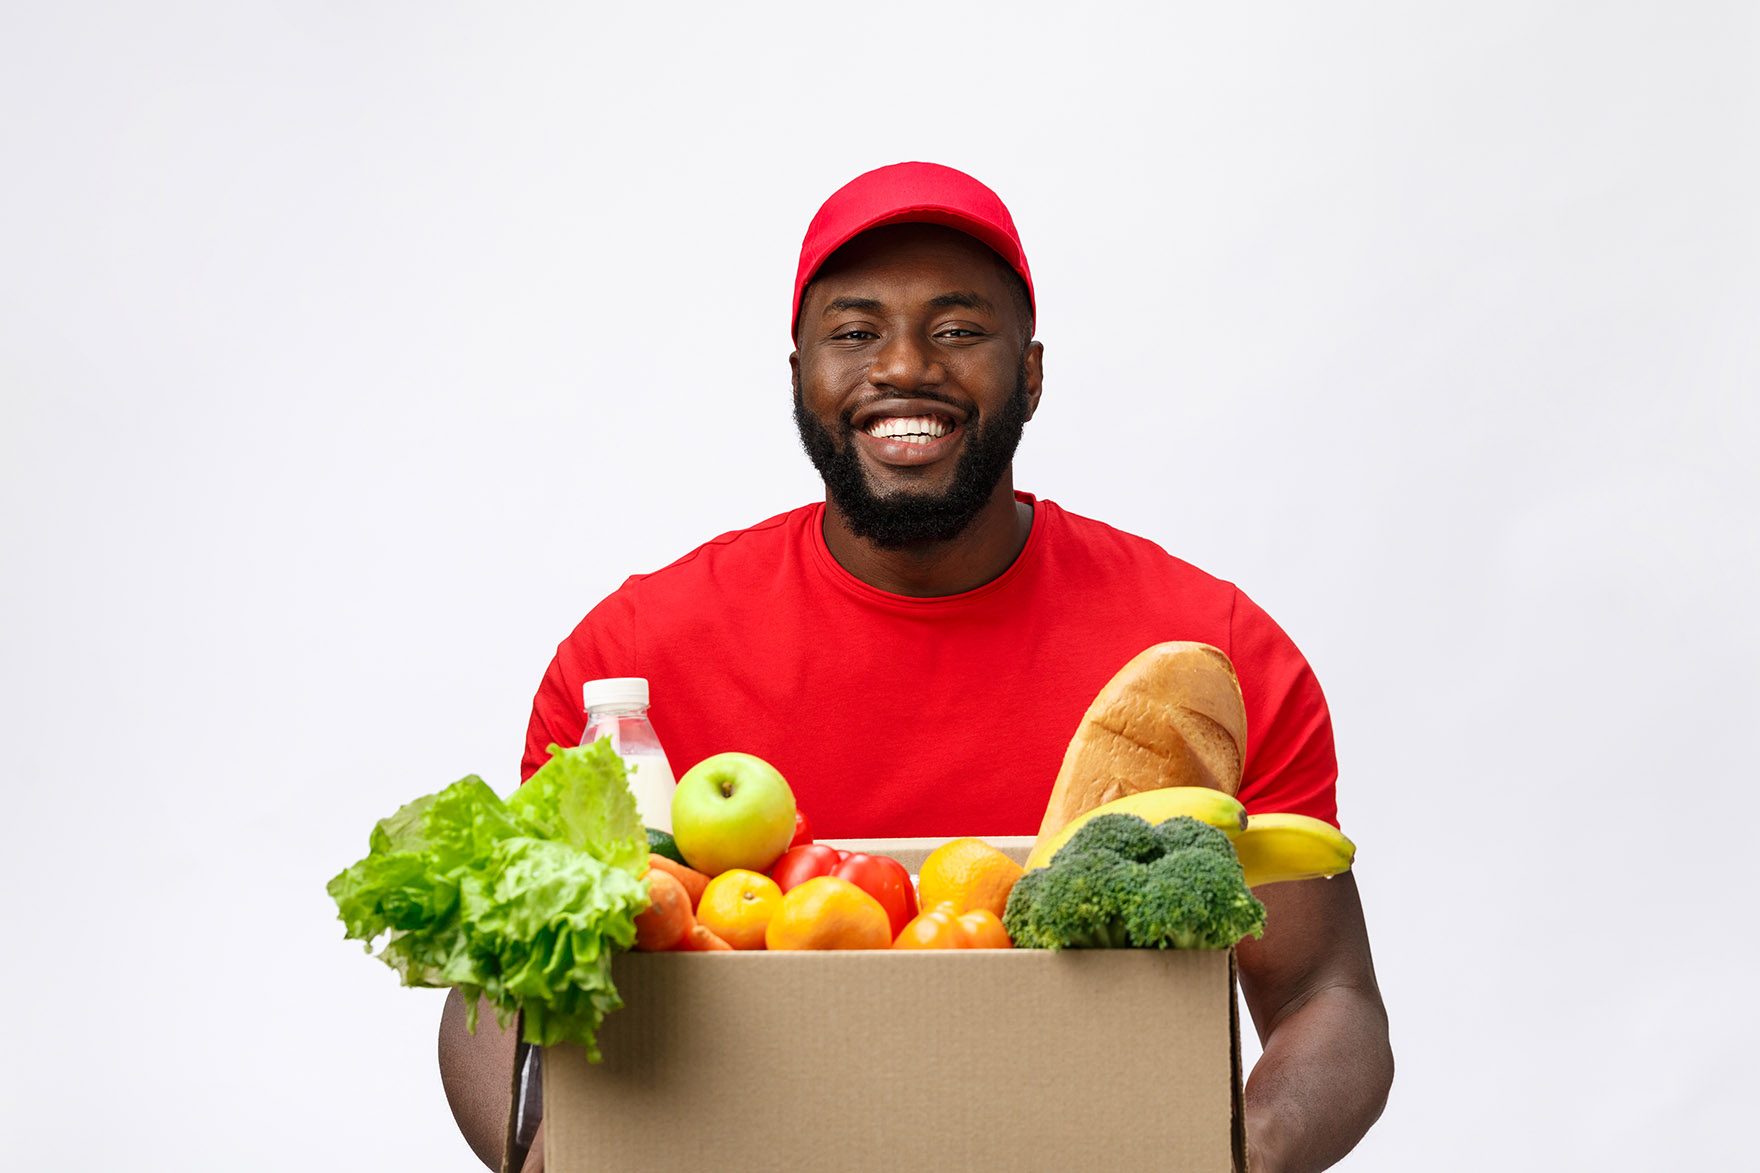 Delivery Concept - Handsome African American delivery man carrying package box of grocery food and drink from store. Isolated on Grey studio Background. Copy Space.